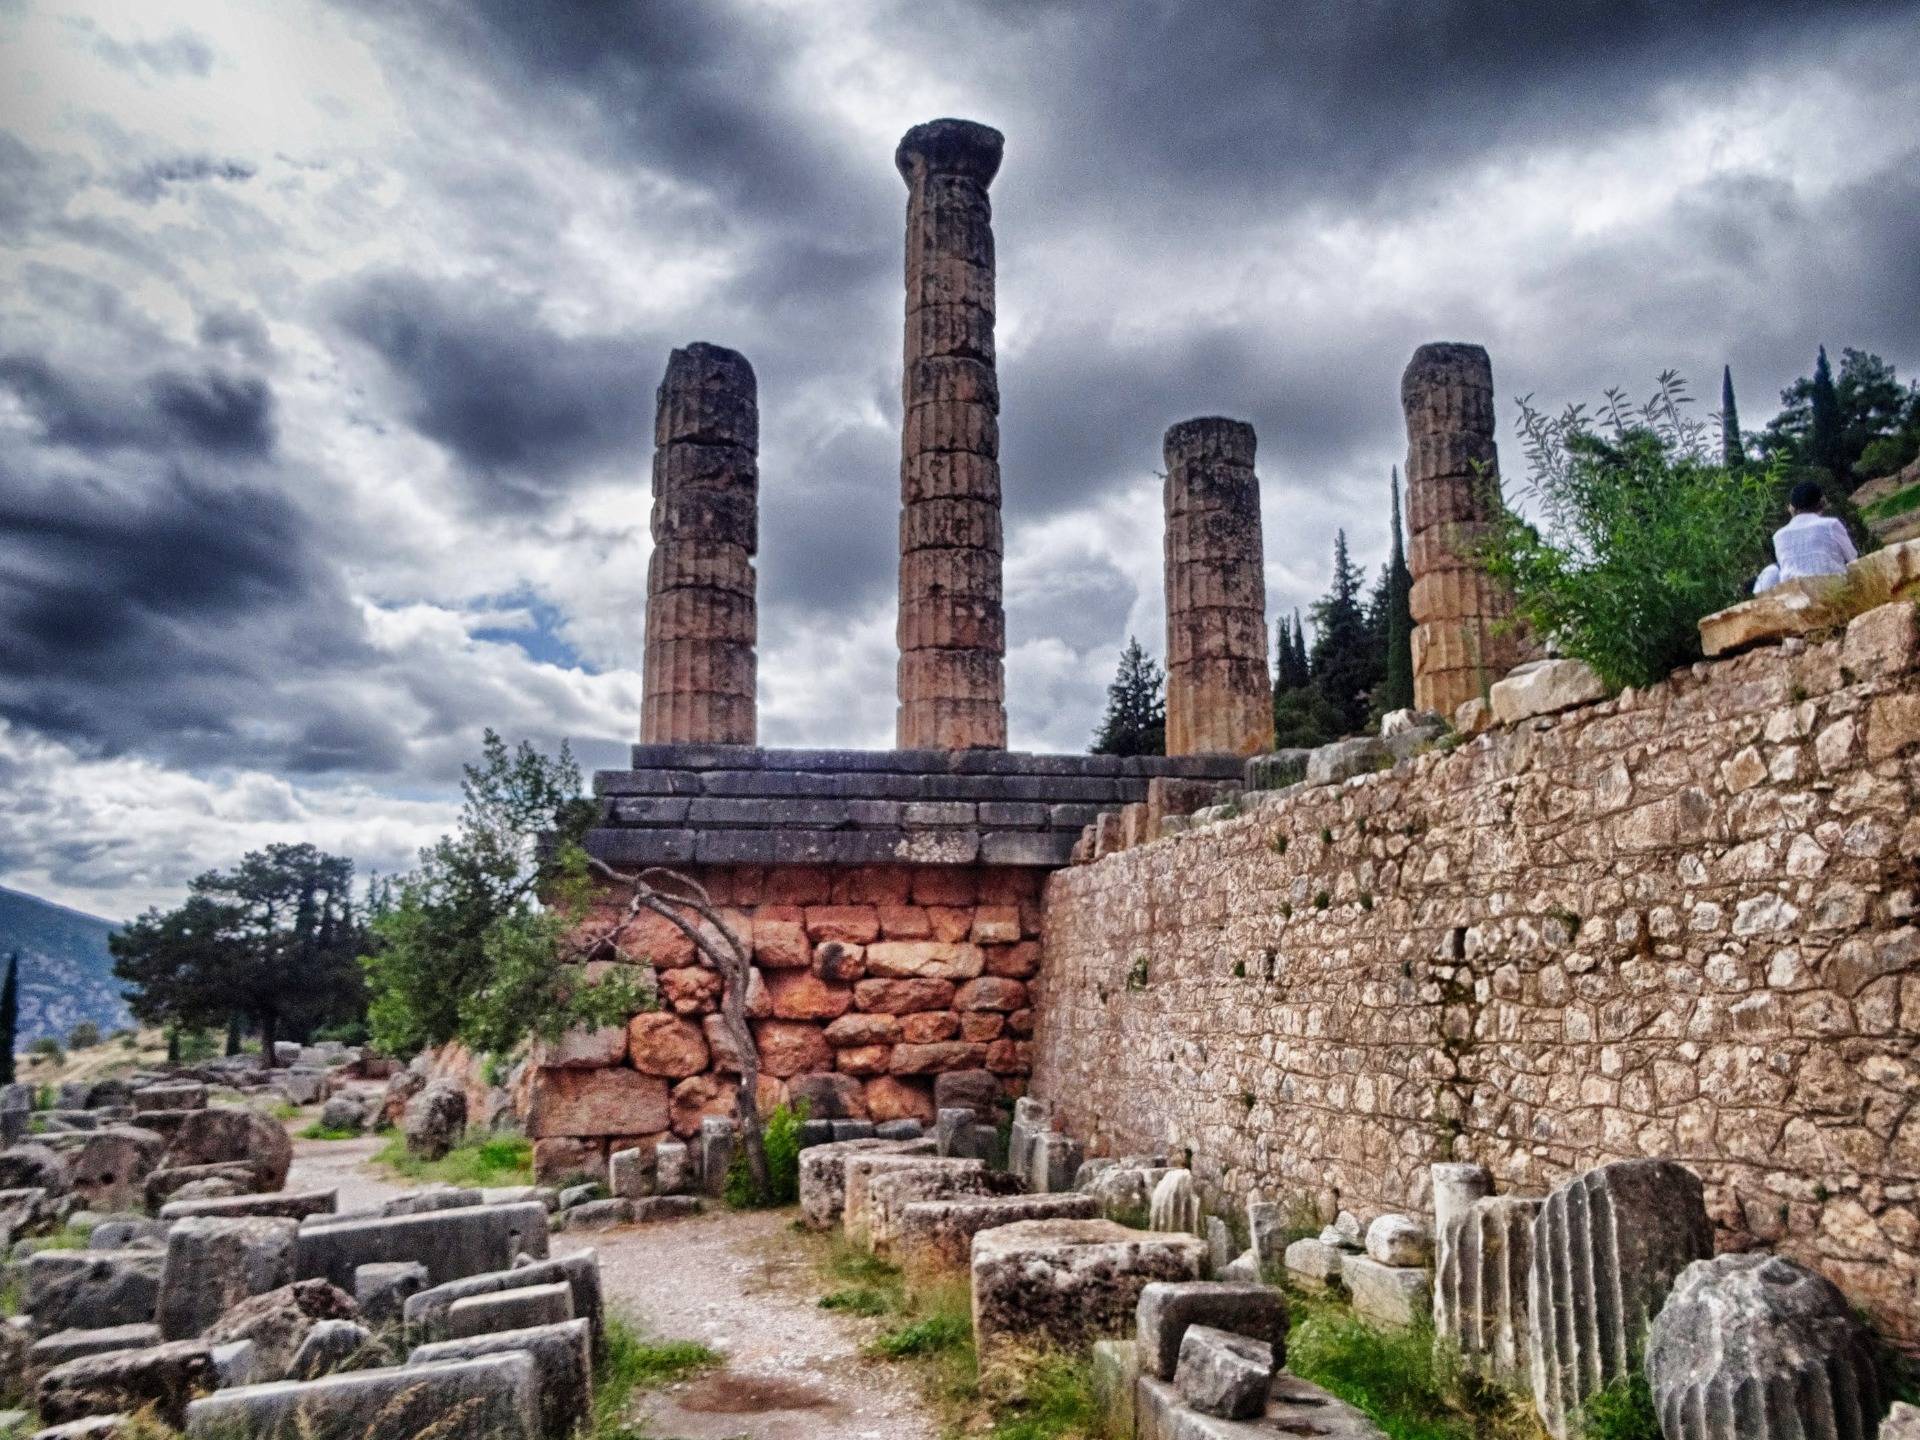 Oracle of Delphi: A trip to the center of the ancient earth